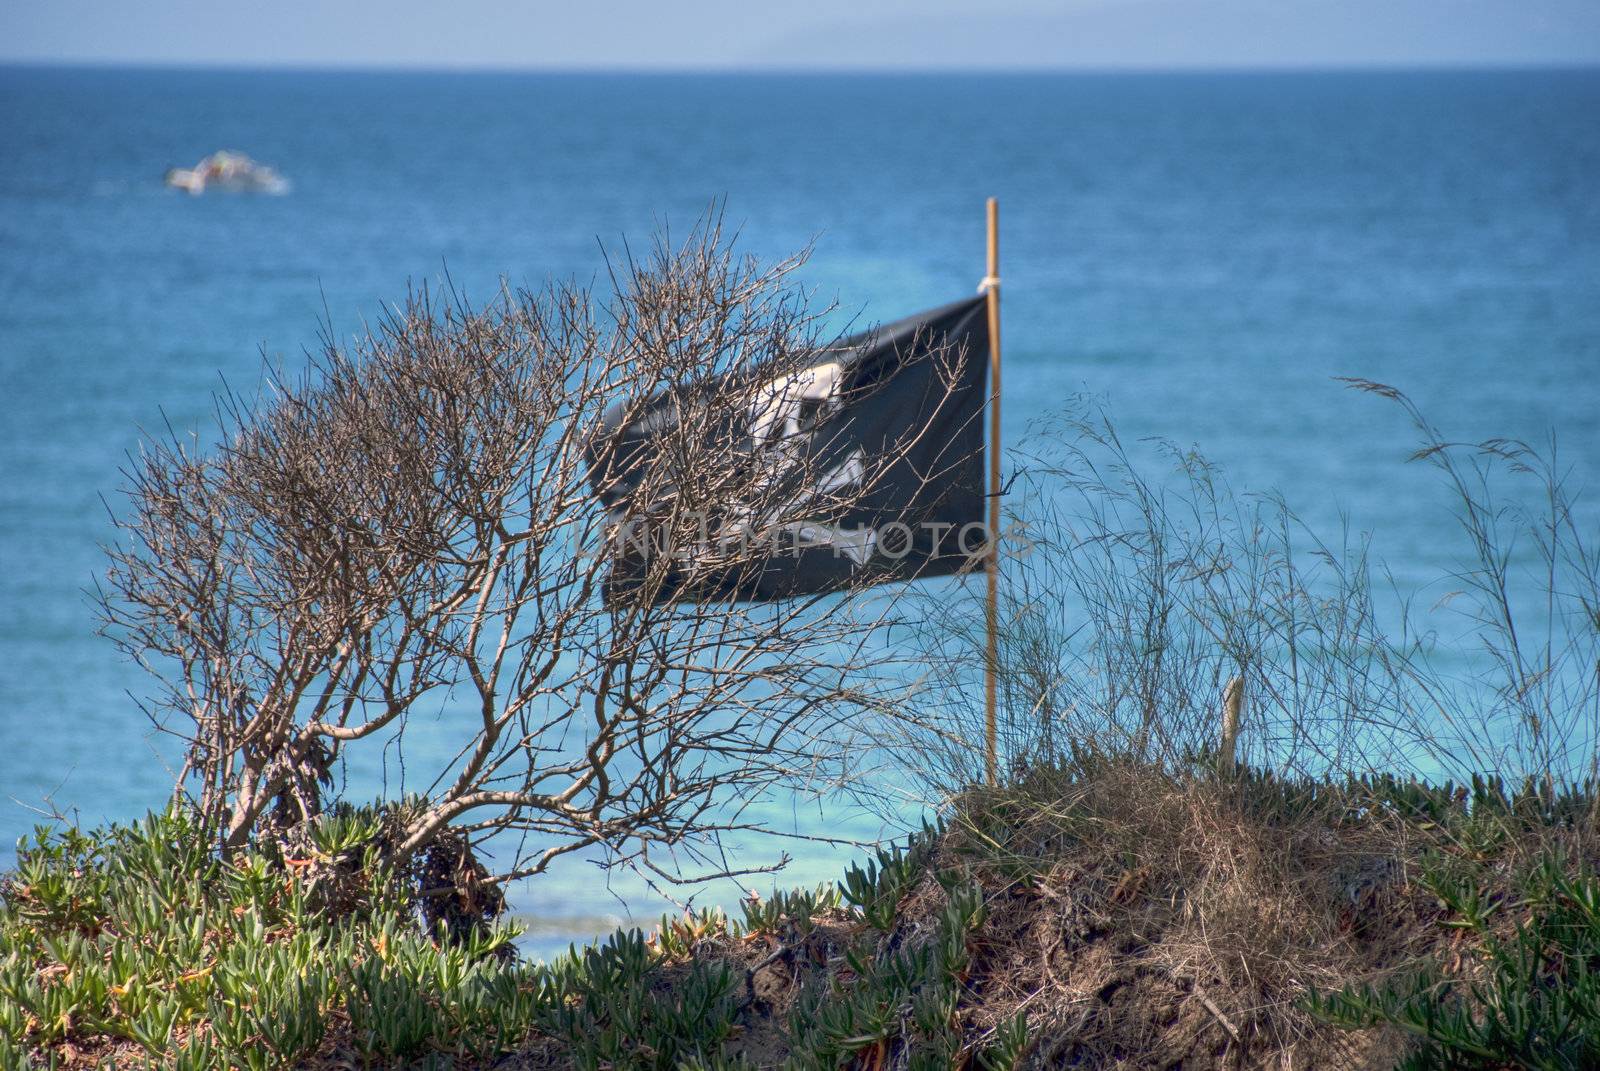 Pirates Flag on a Tuscan Beach, July 2007 by jovannig